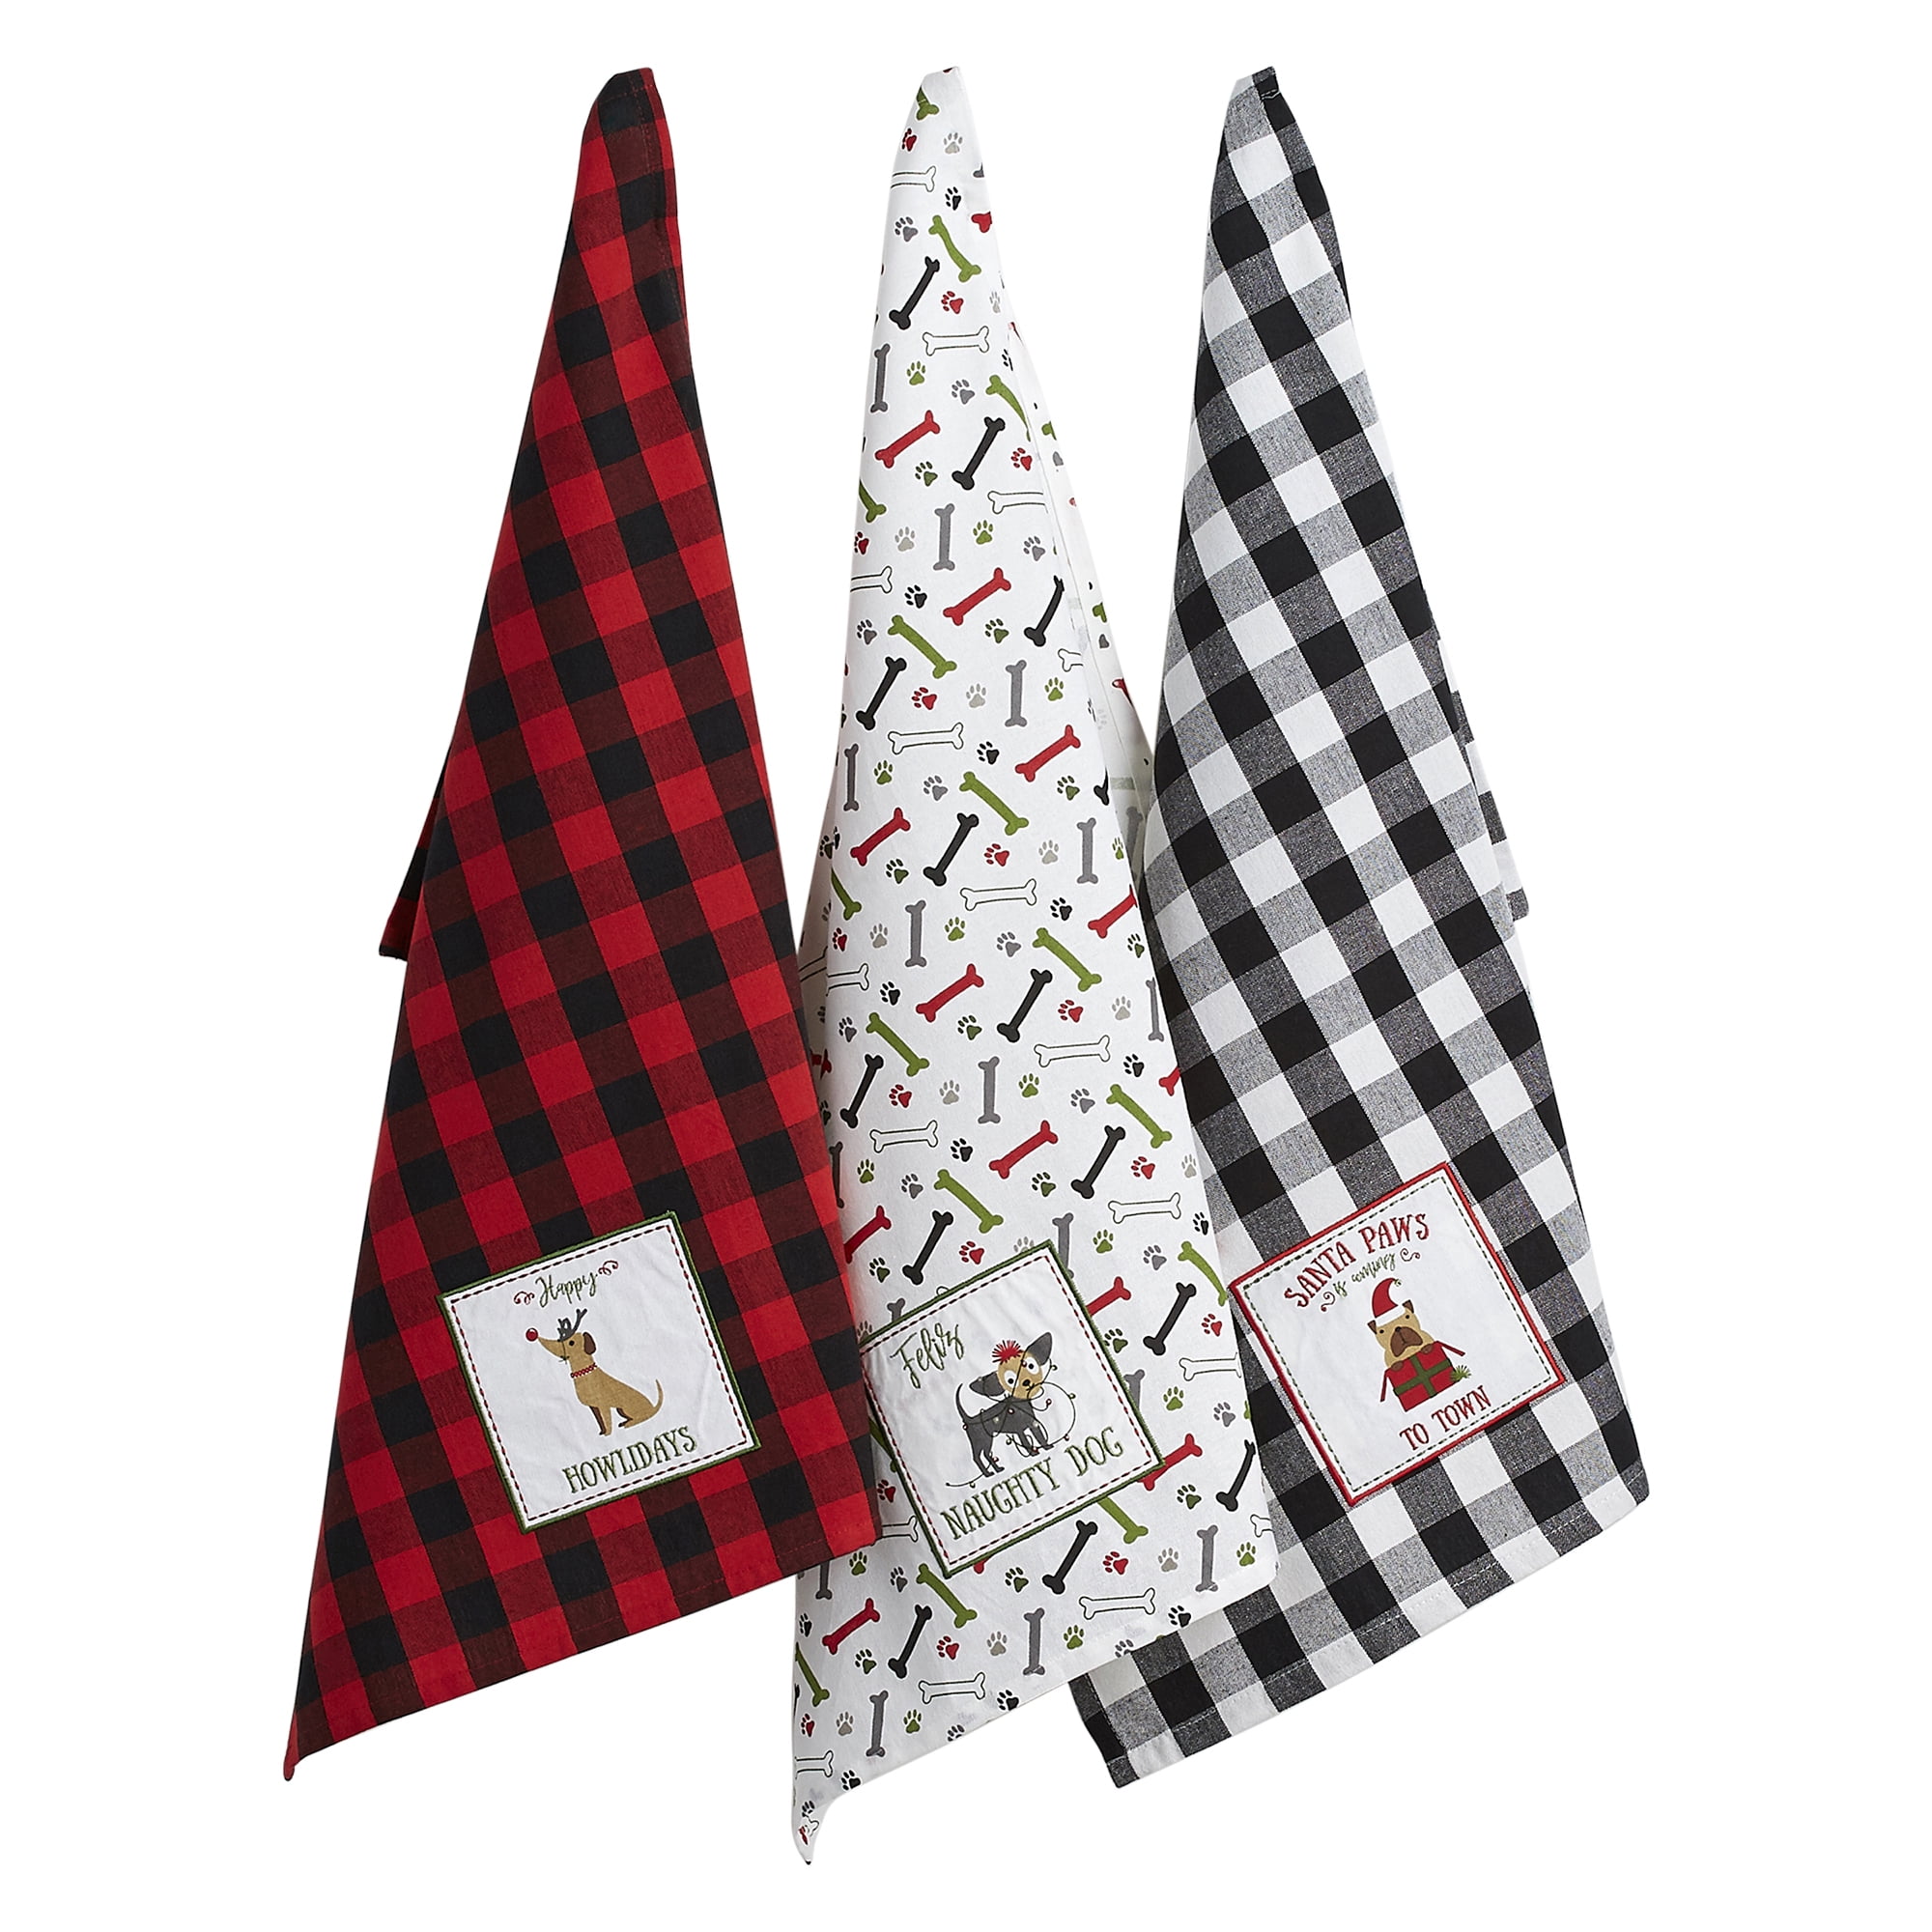 NICHOLAS SQUARE WINE KITCHEN SPREADING CHRISTMAS CHEER TOWELS NEW #17182 ST 